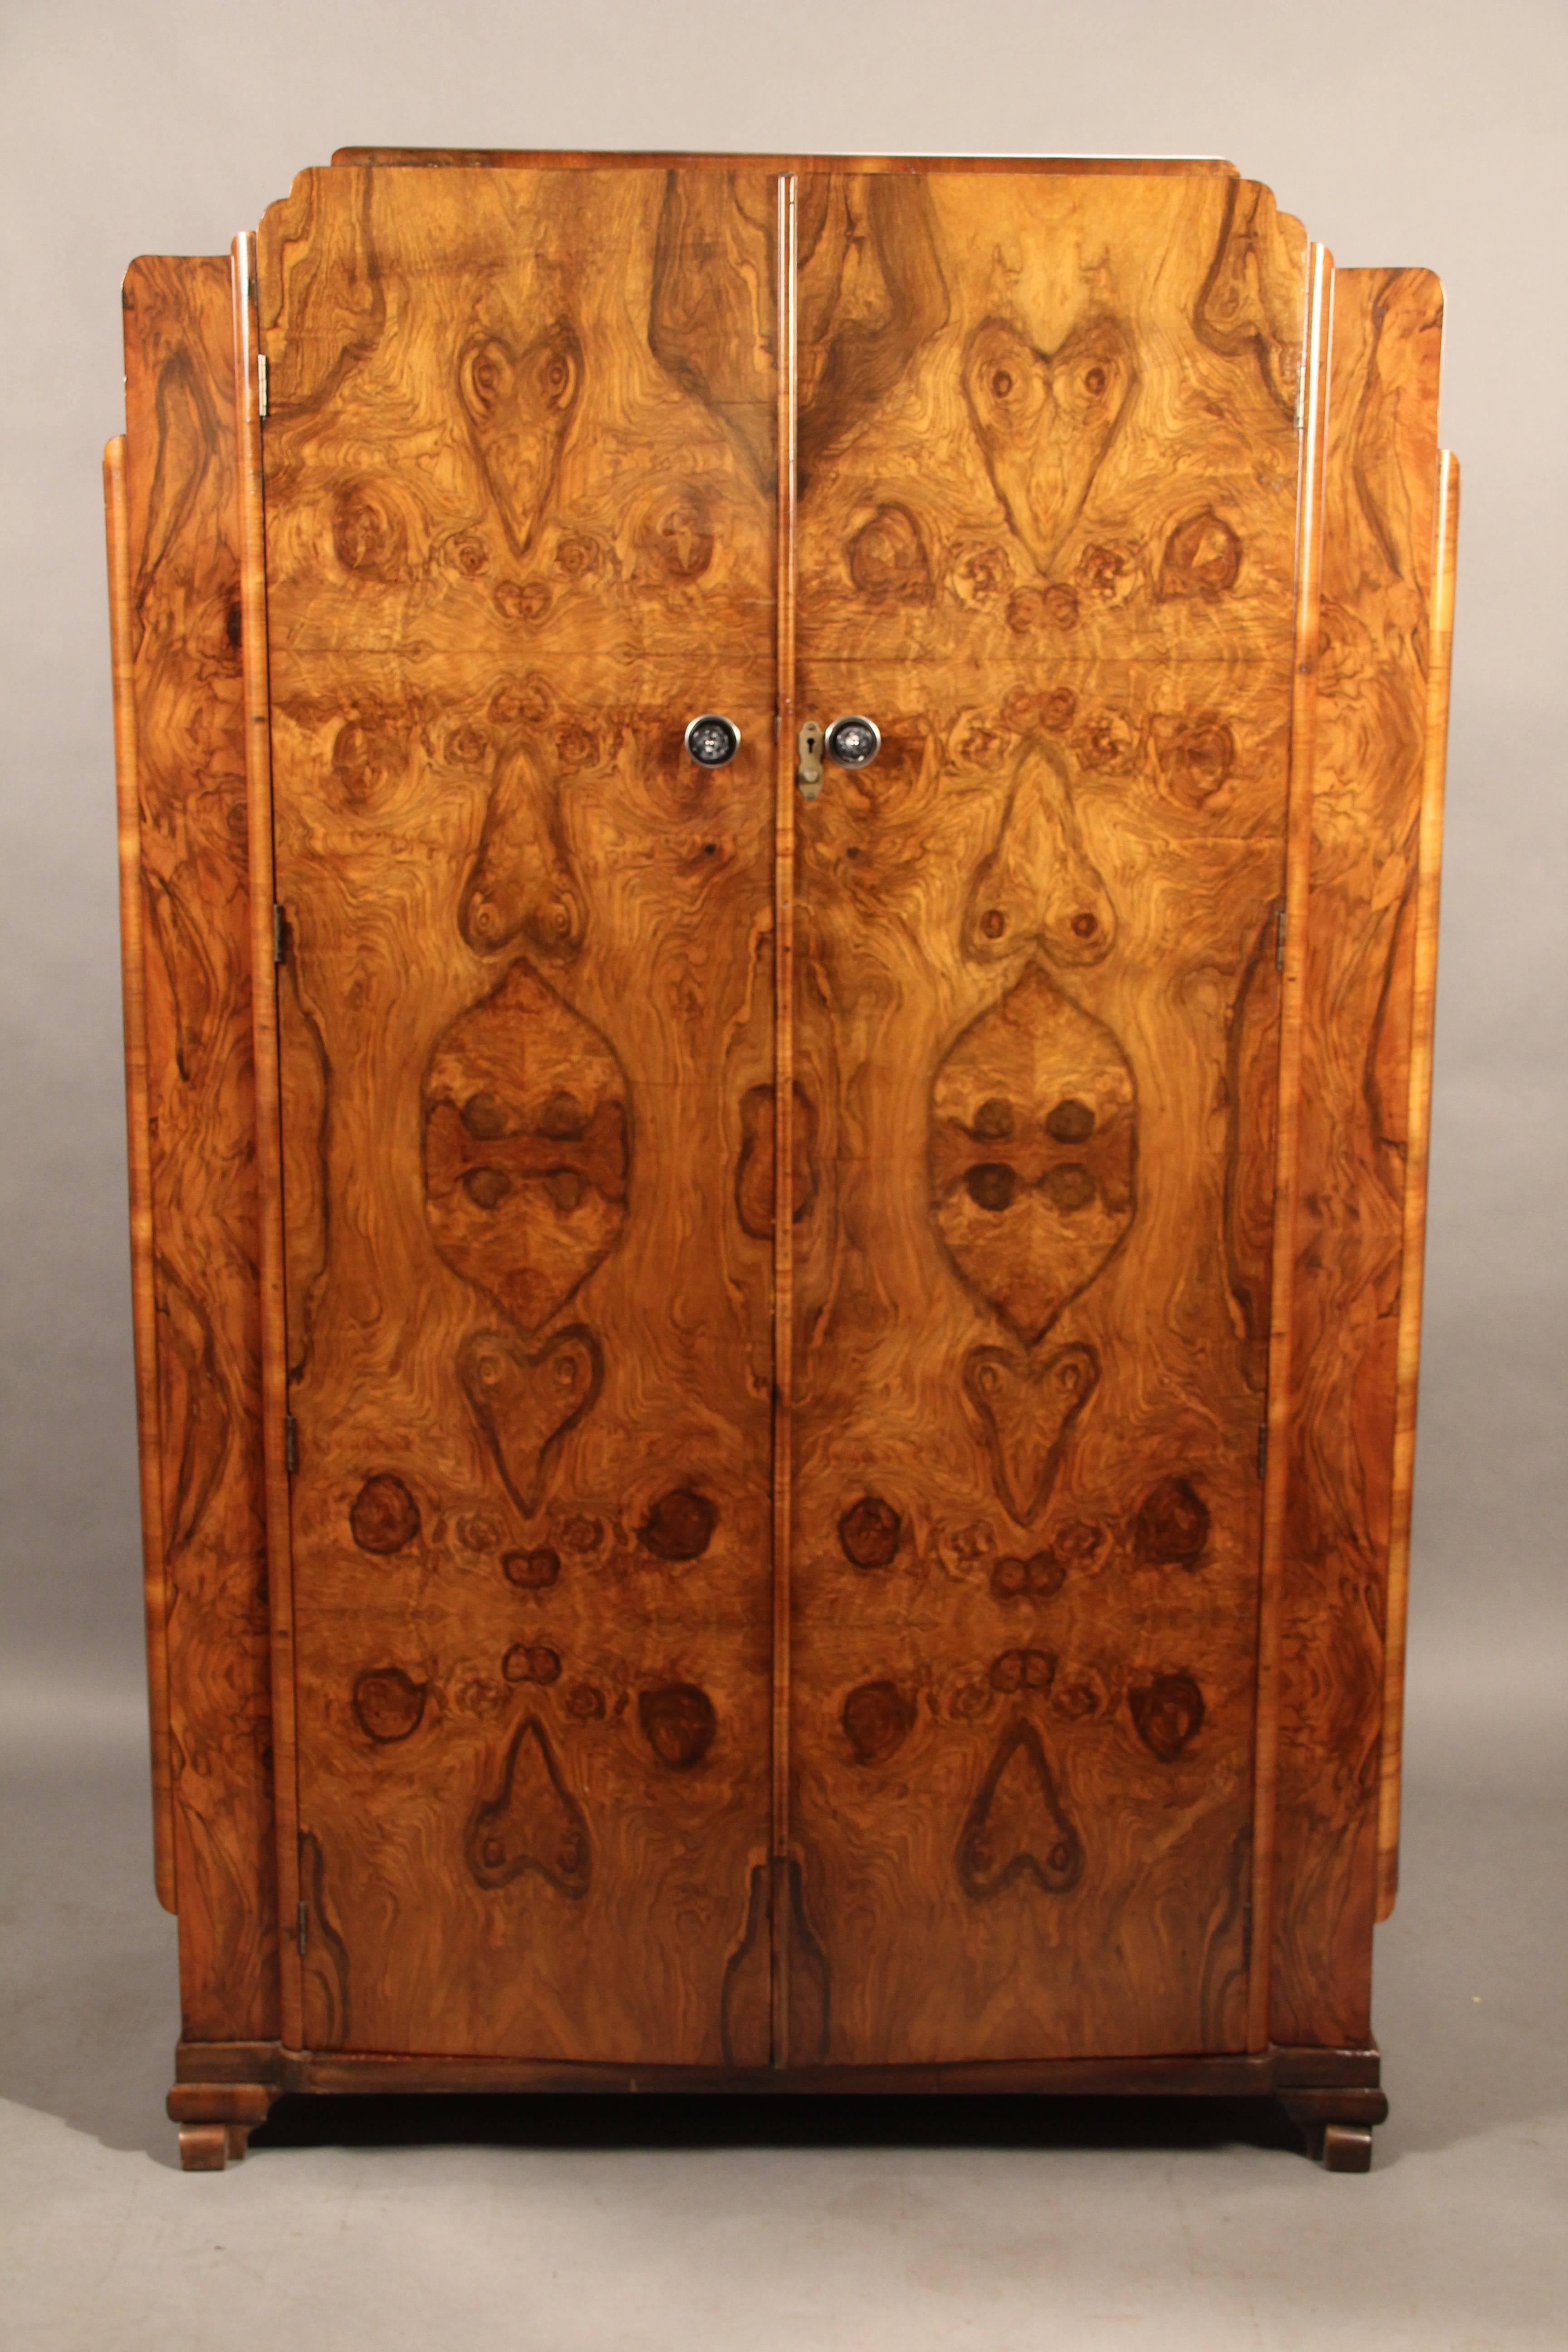 Armoire with beautiful burl wood front. Back was drilled for electronics at one point, circa 1930s.